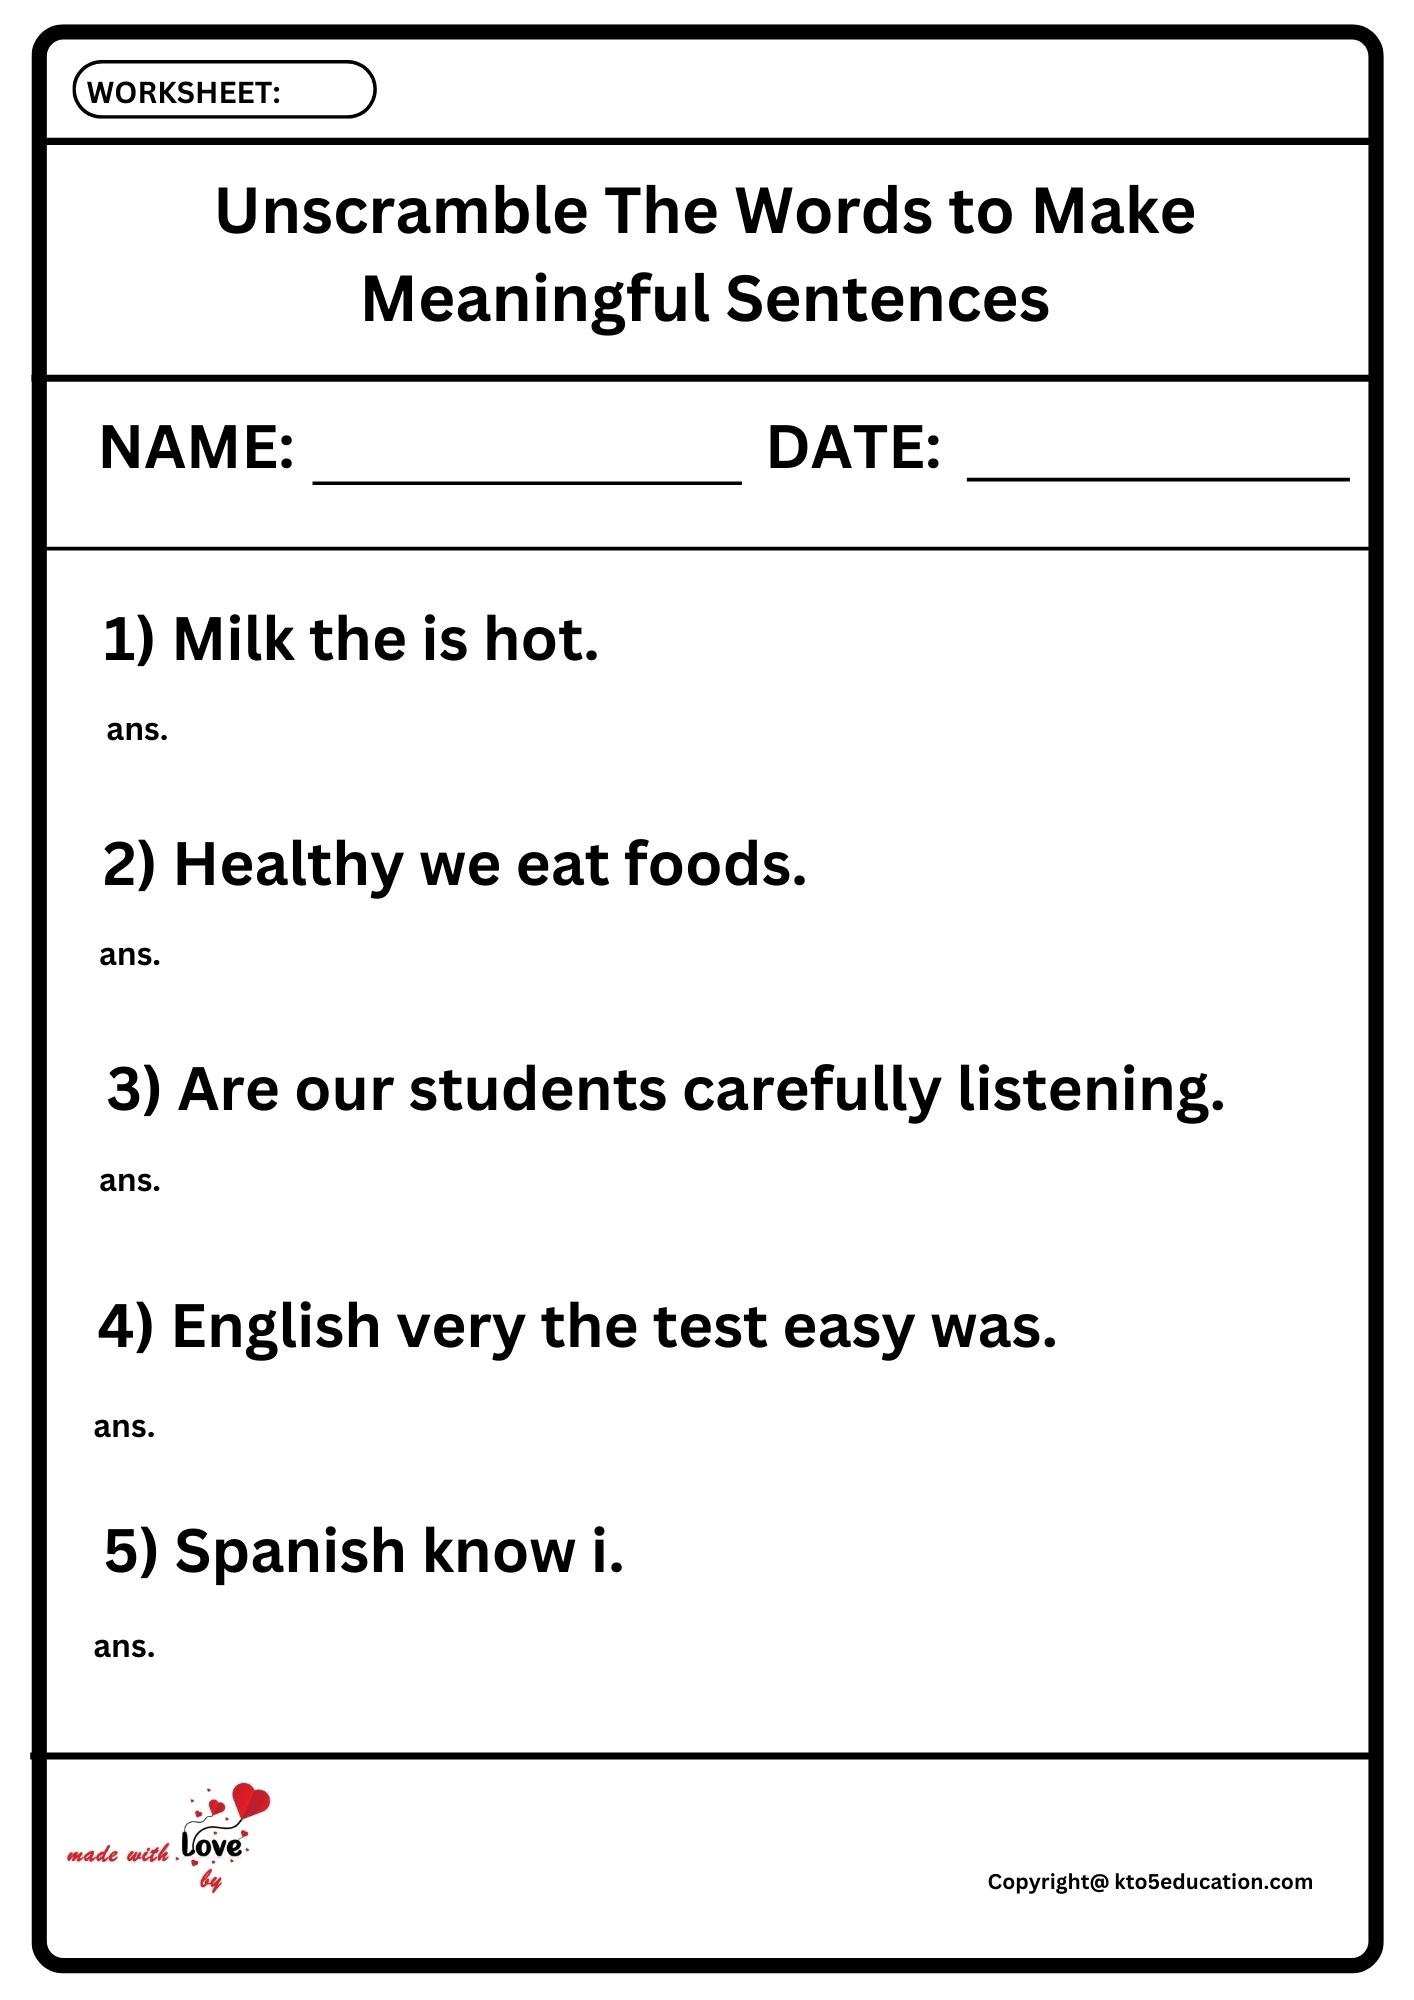 Unscramble The Word To Make Meaningful Sentences Worksheet 2